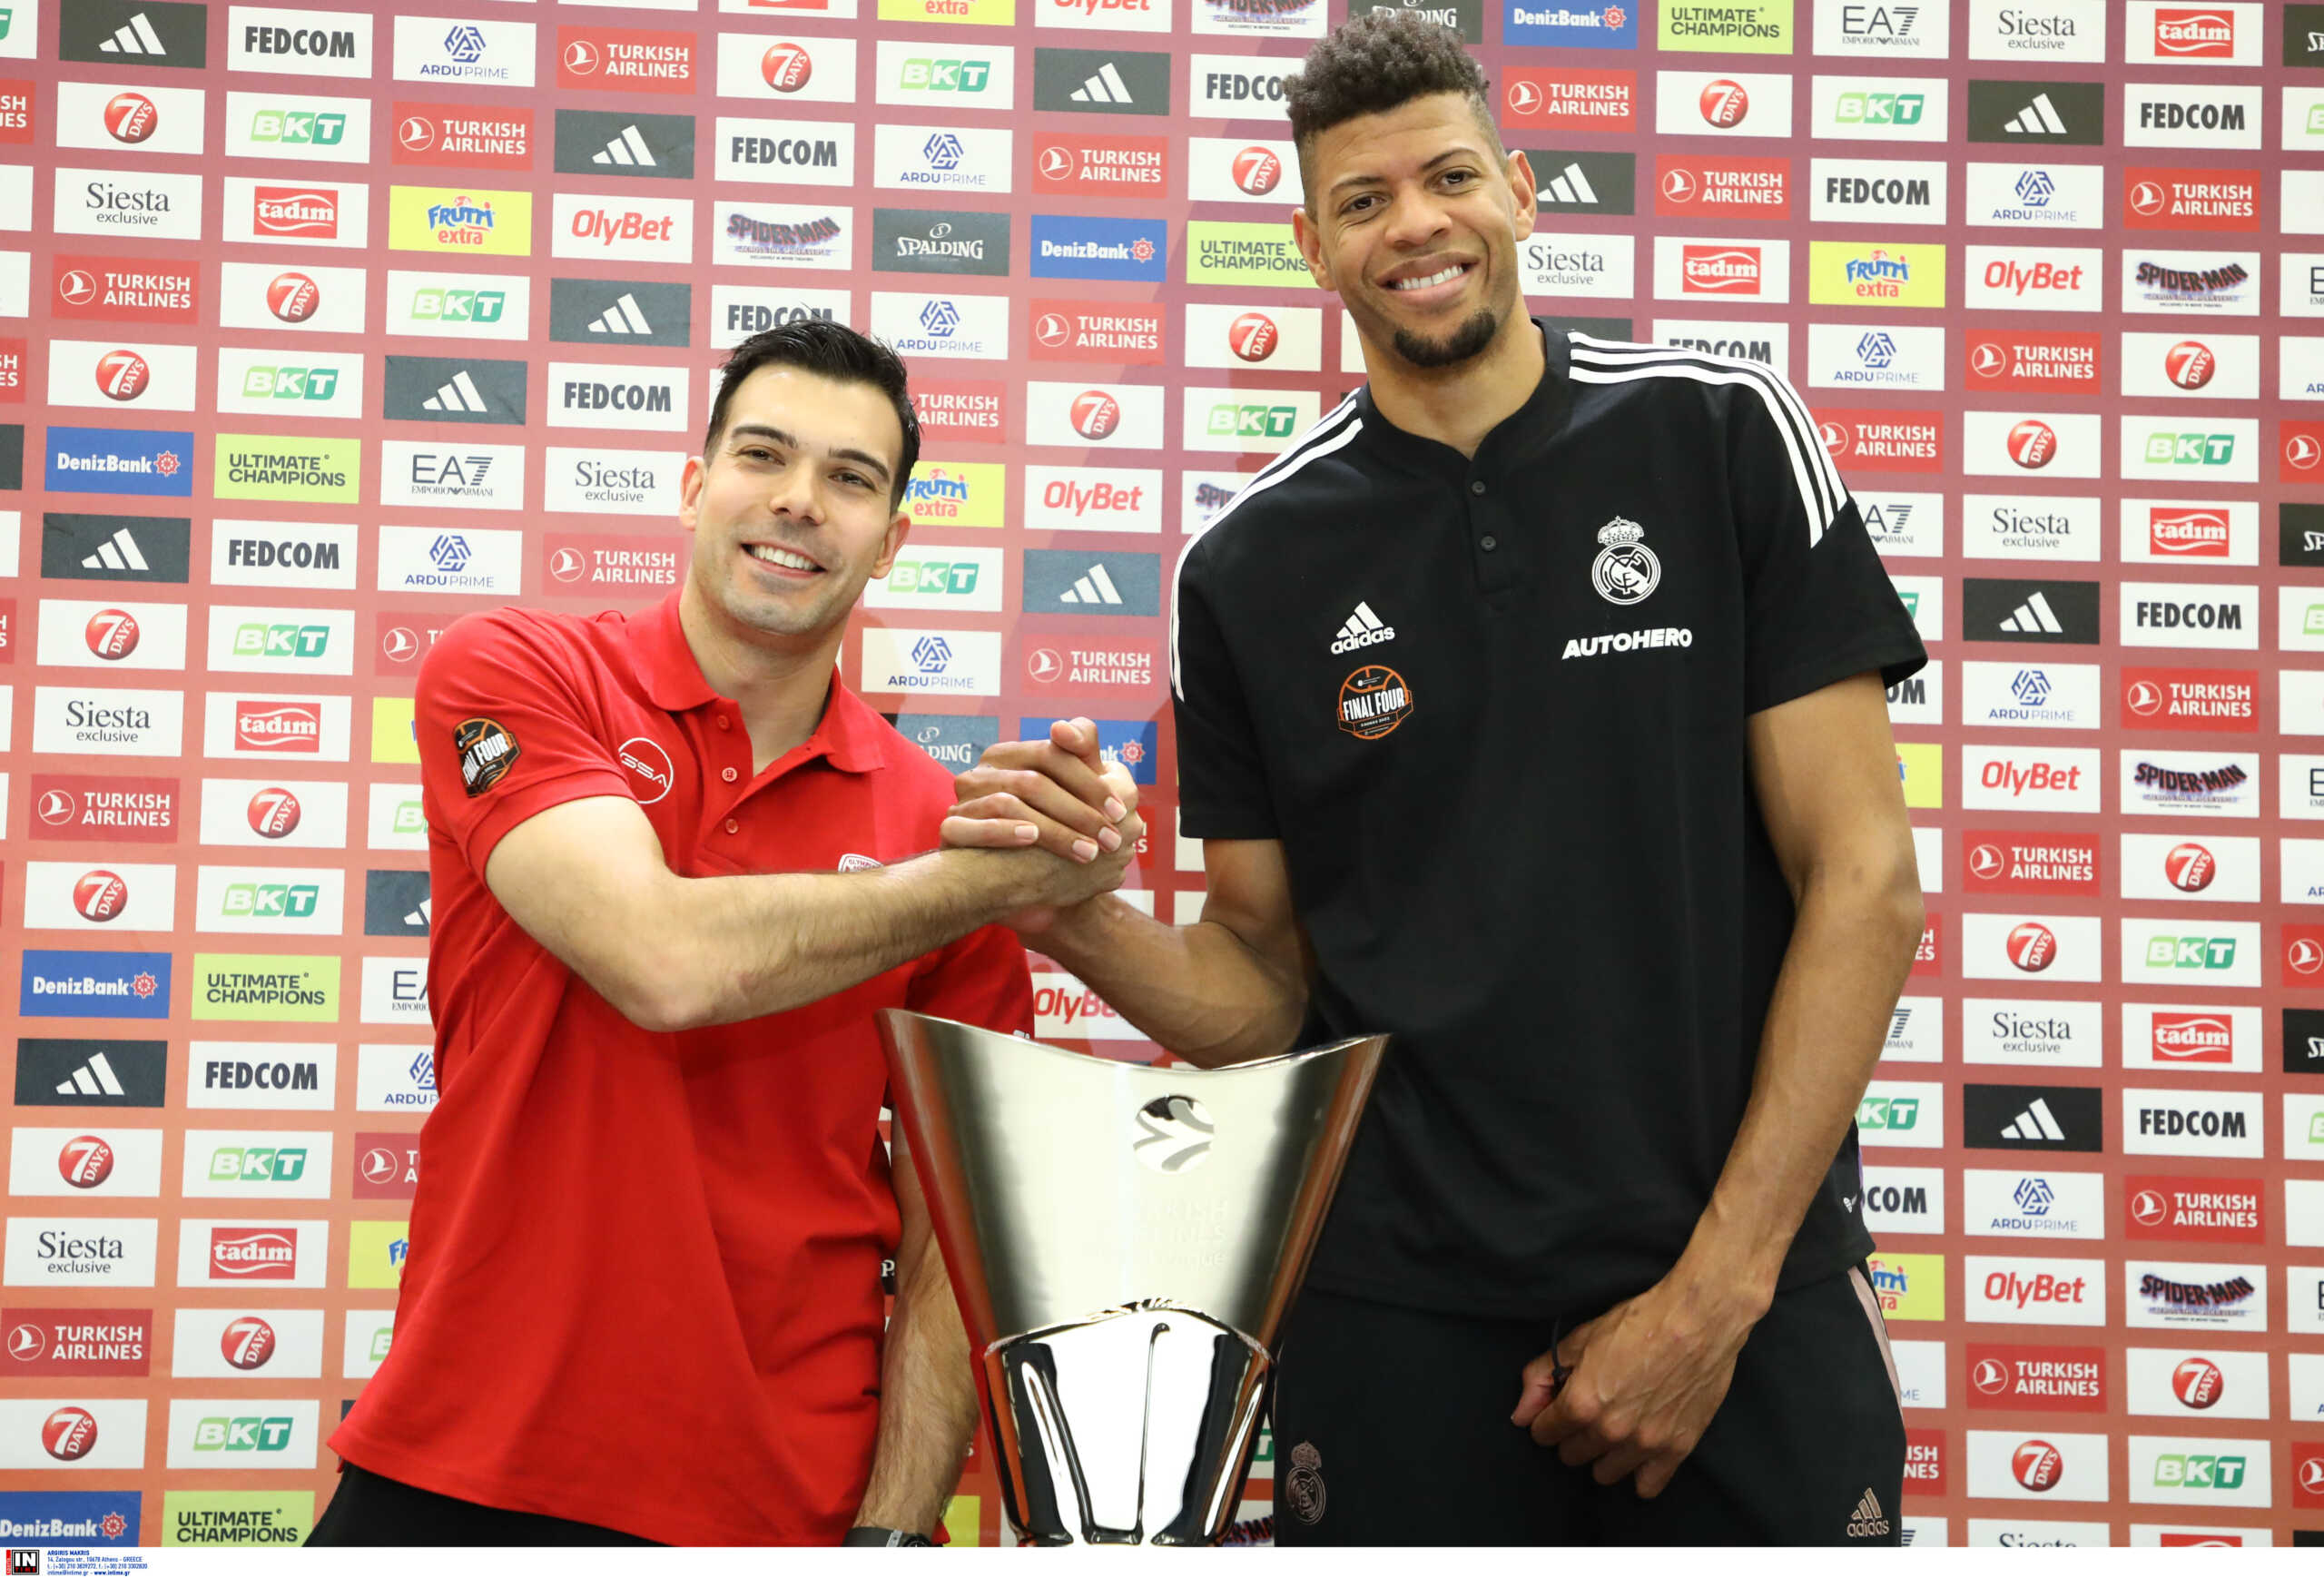 Euroleague final: Olympiacos – Real Madrid with the trophy in the background